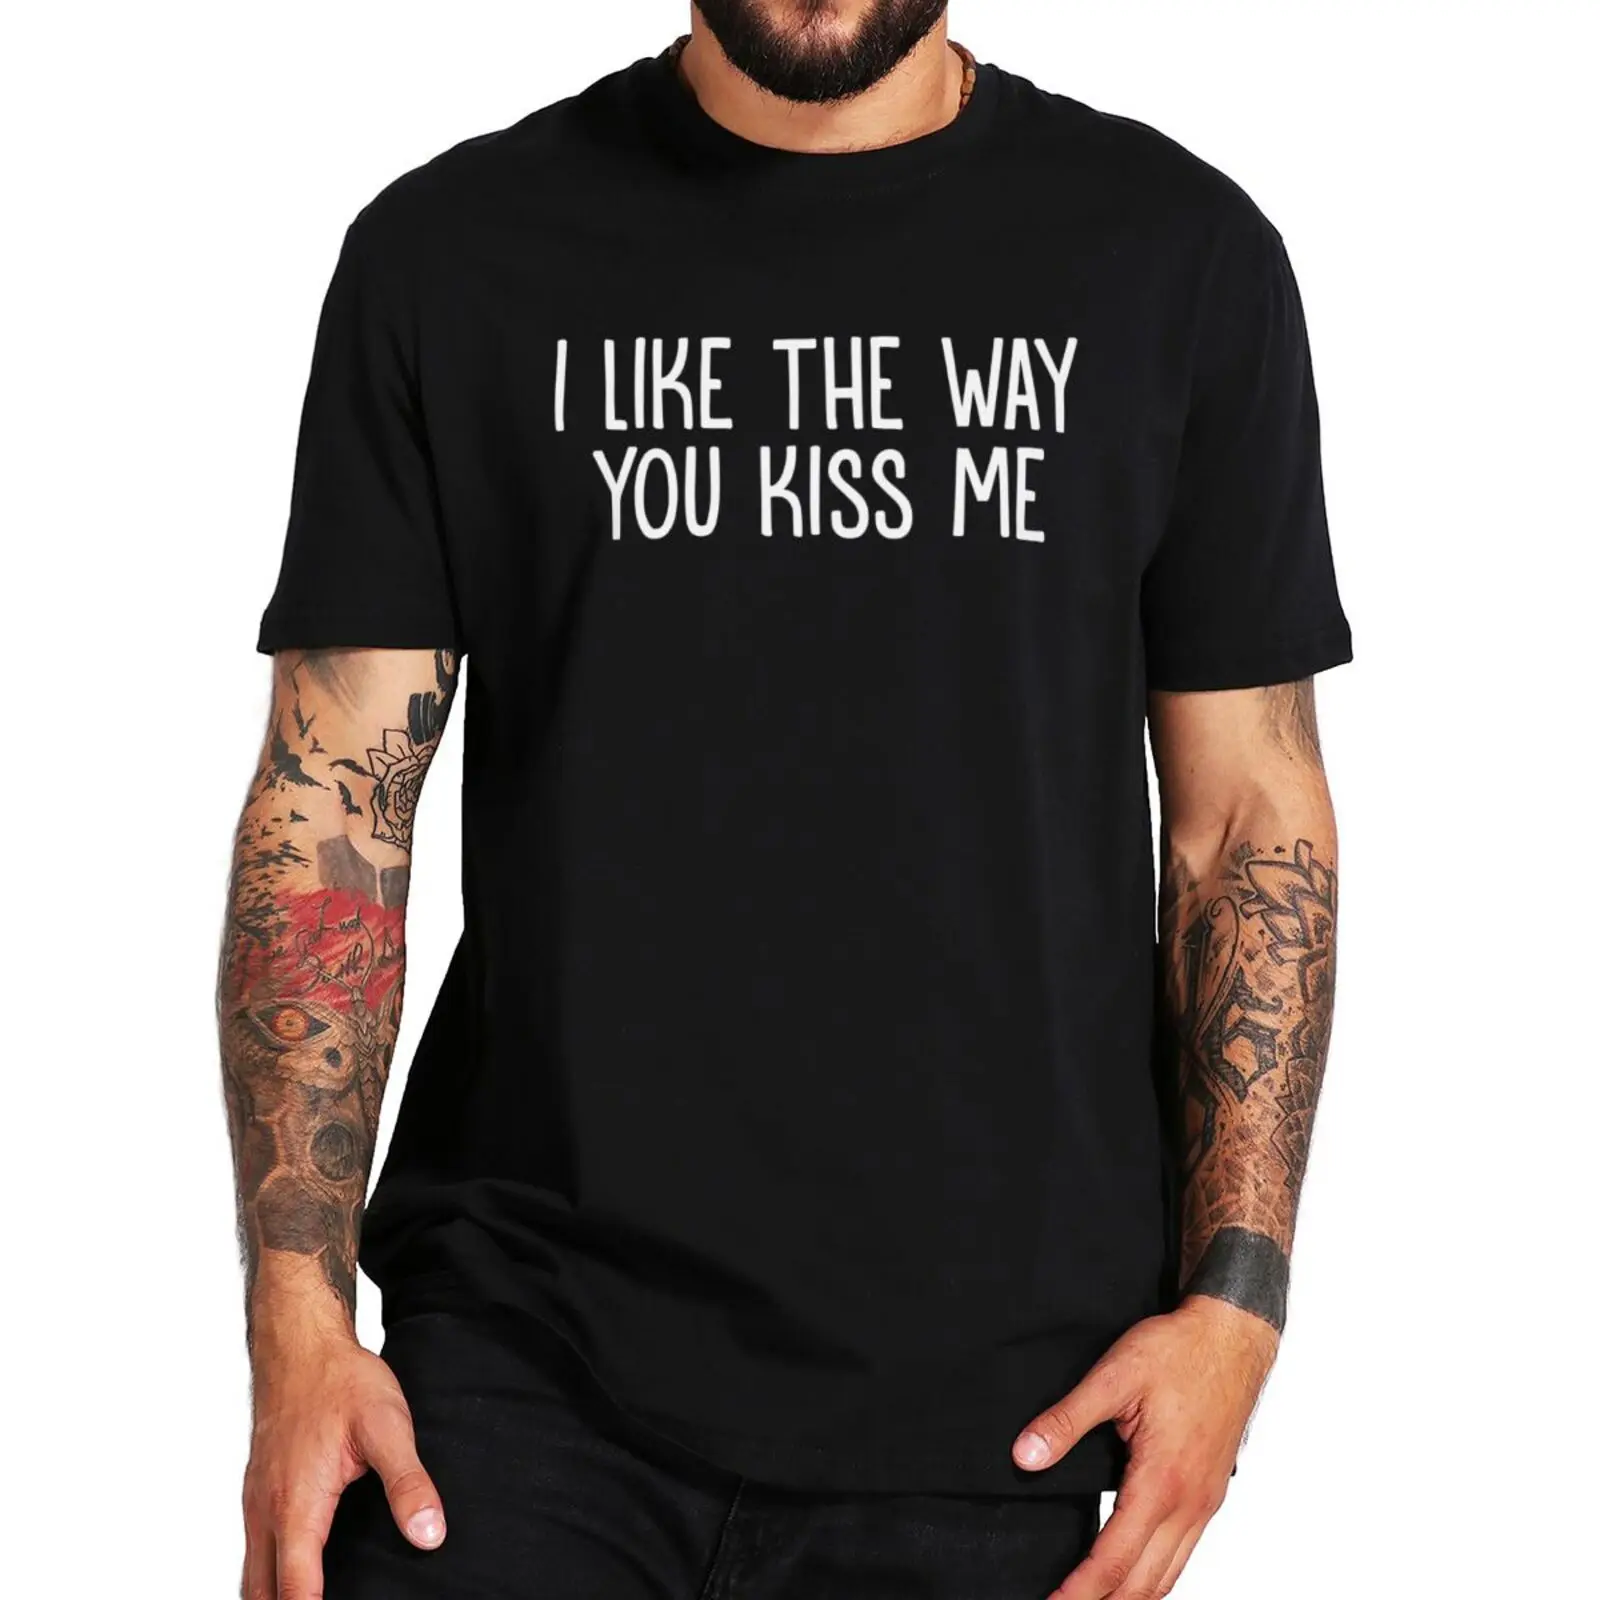 

I Like The Way You Kiss Me T Shirt Pop Music Quotes Fans Gift Tee Tops 100% Cotton Soft Unisex O-neck T-shirt EU Size